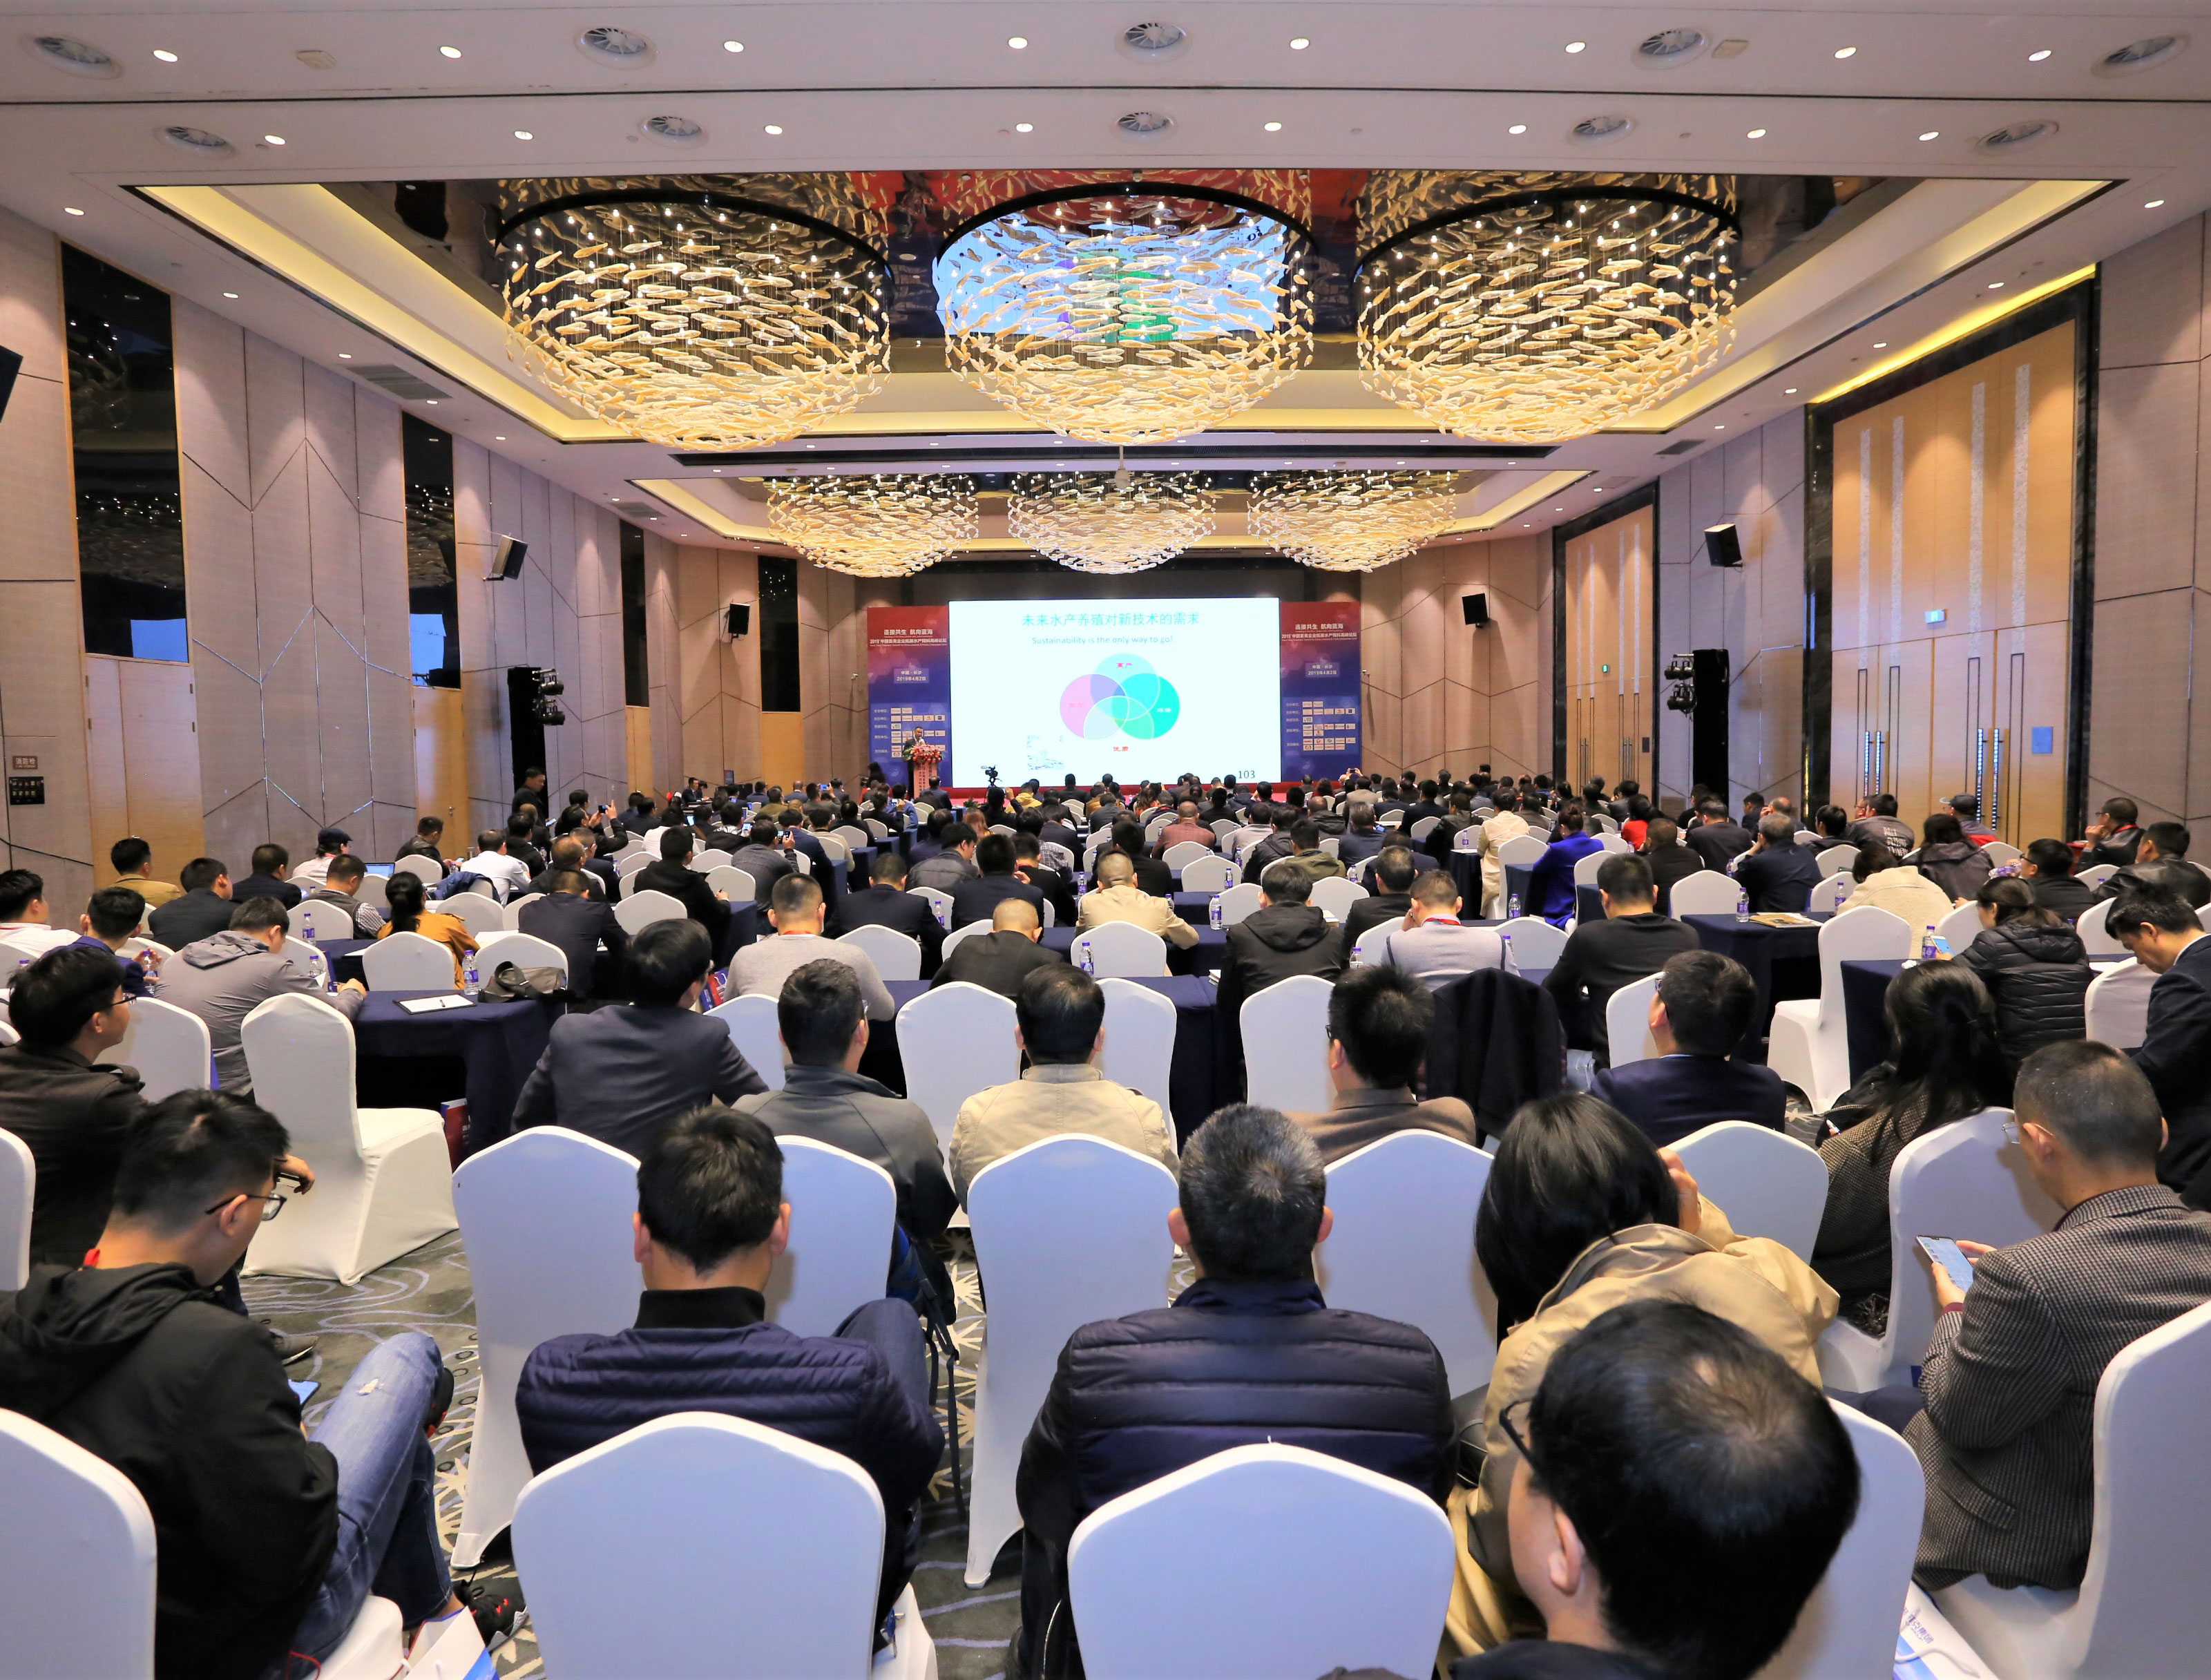 Heading to the Blue Ocean with joint Symbiosis– “Aqua Feed Expansion Summit for China Livestock and Poultry Enterprise 2019” was successfully held